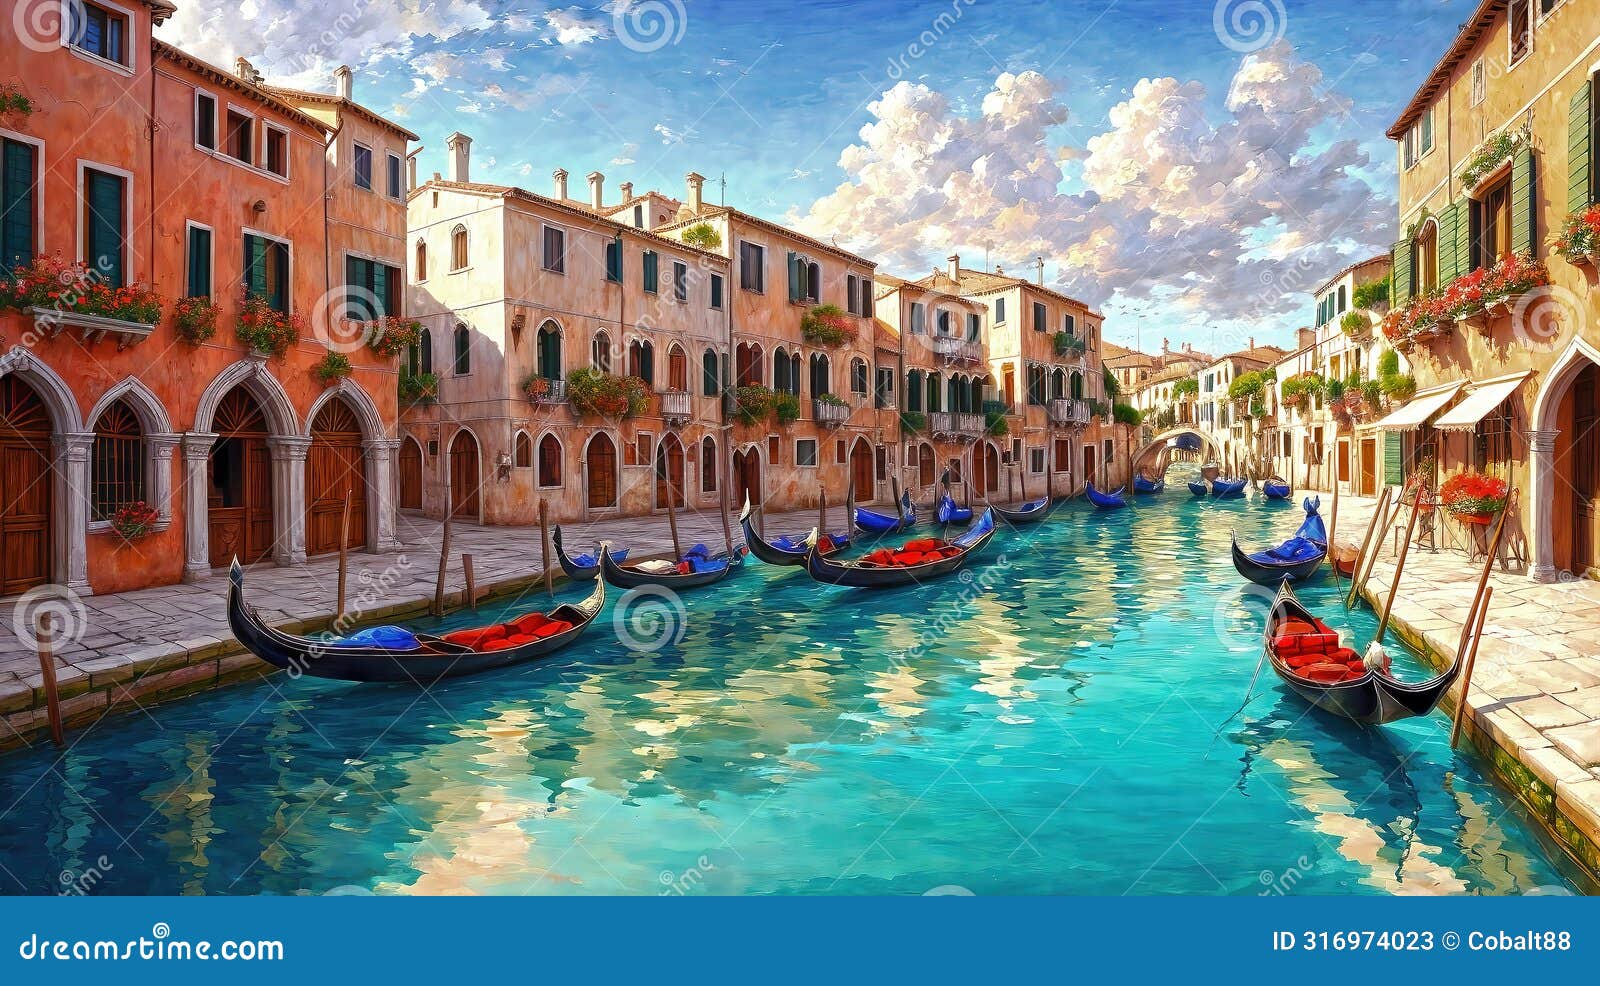 venice canals with gondolas atmospheric landscape , oil painting style 